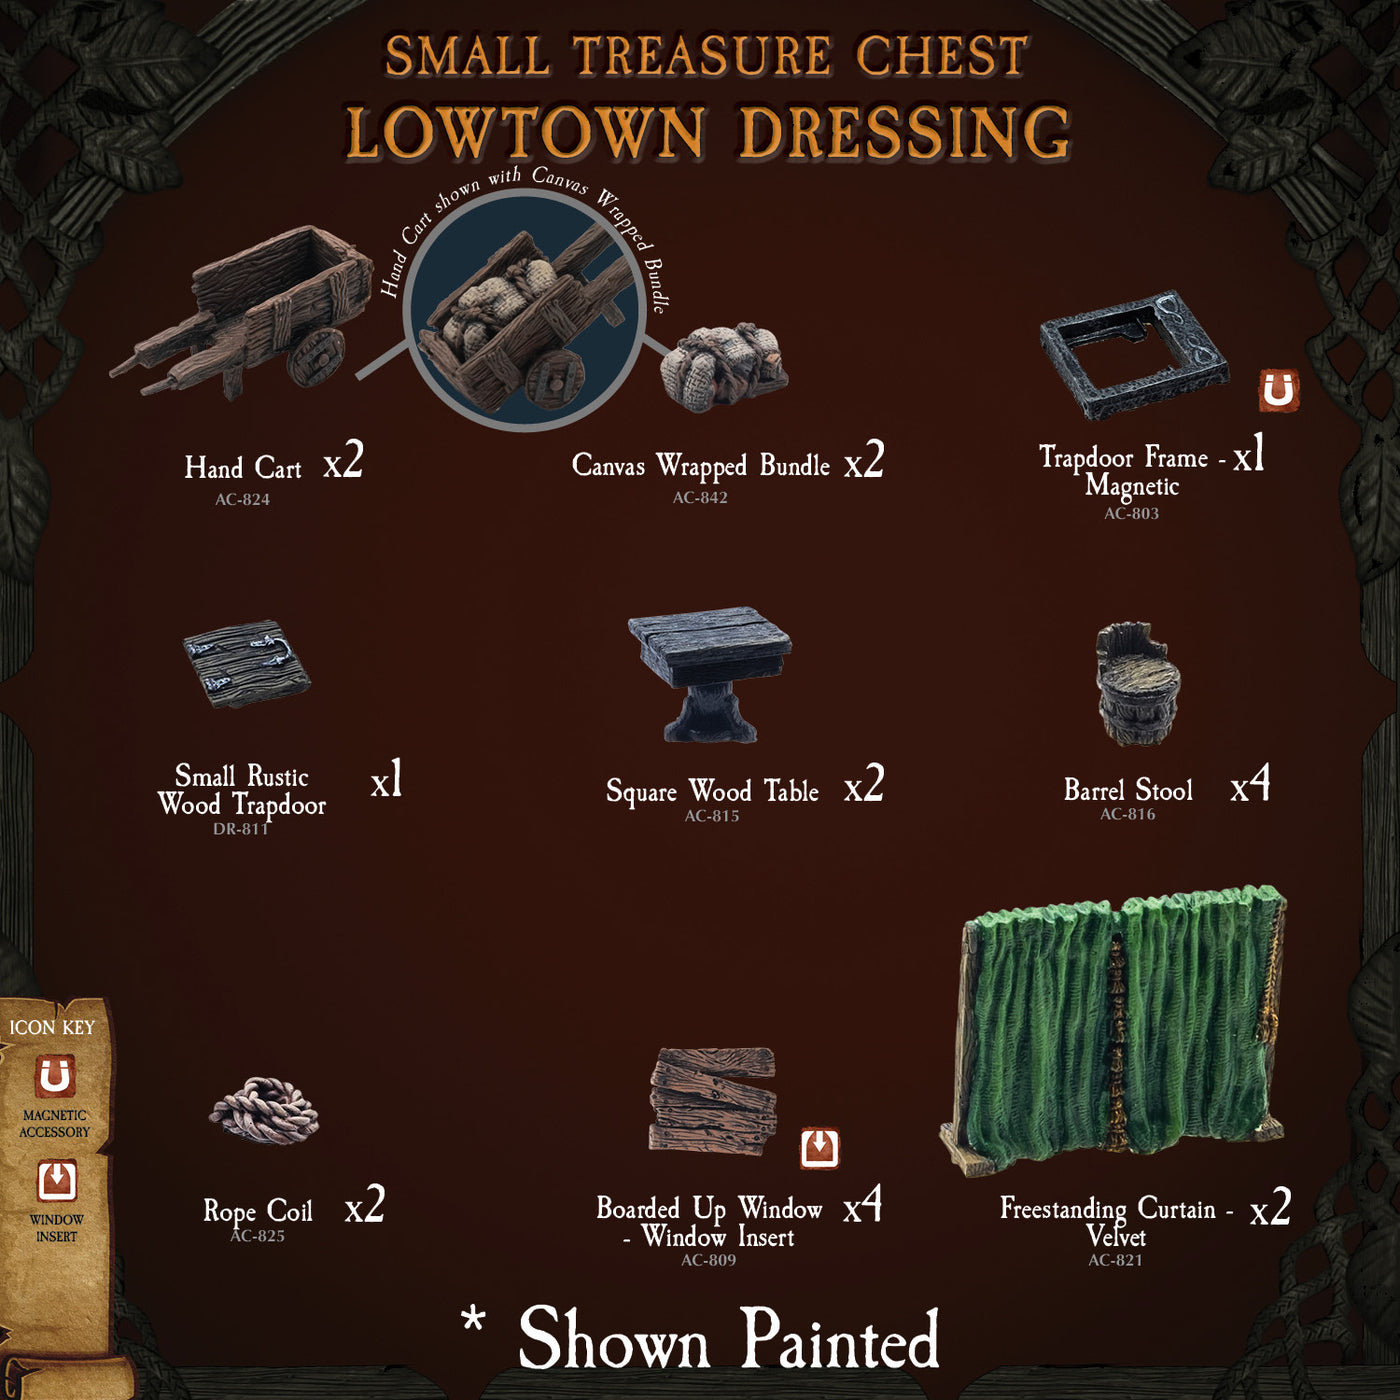 Small Treasure Chest - Lowtown Dressing (Unpainted)